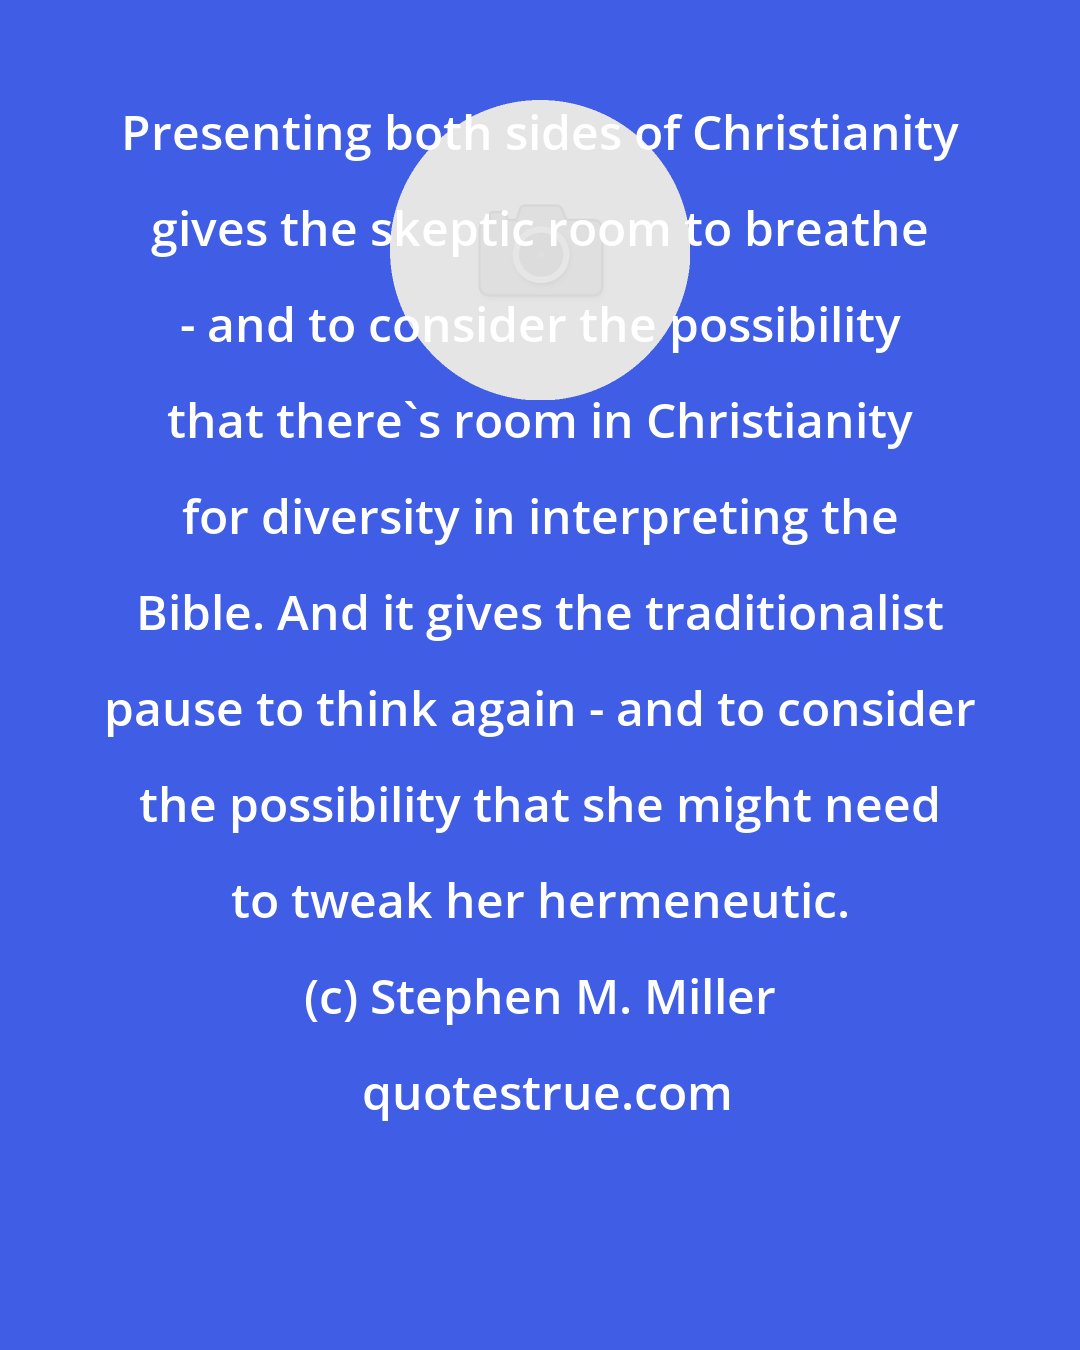 Stephen M. Miller: Presenting both sides of Christianity gives the skeptic room to breathe - and to consider the possibility that there's room in Christianity for diversity in interpreting the Bible. And it gives the traditionalist pause to think again - and to consider the possibility that she might need to tweak her hermeneutic.